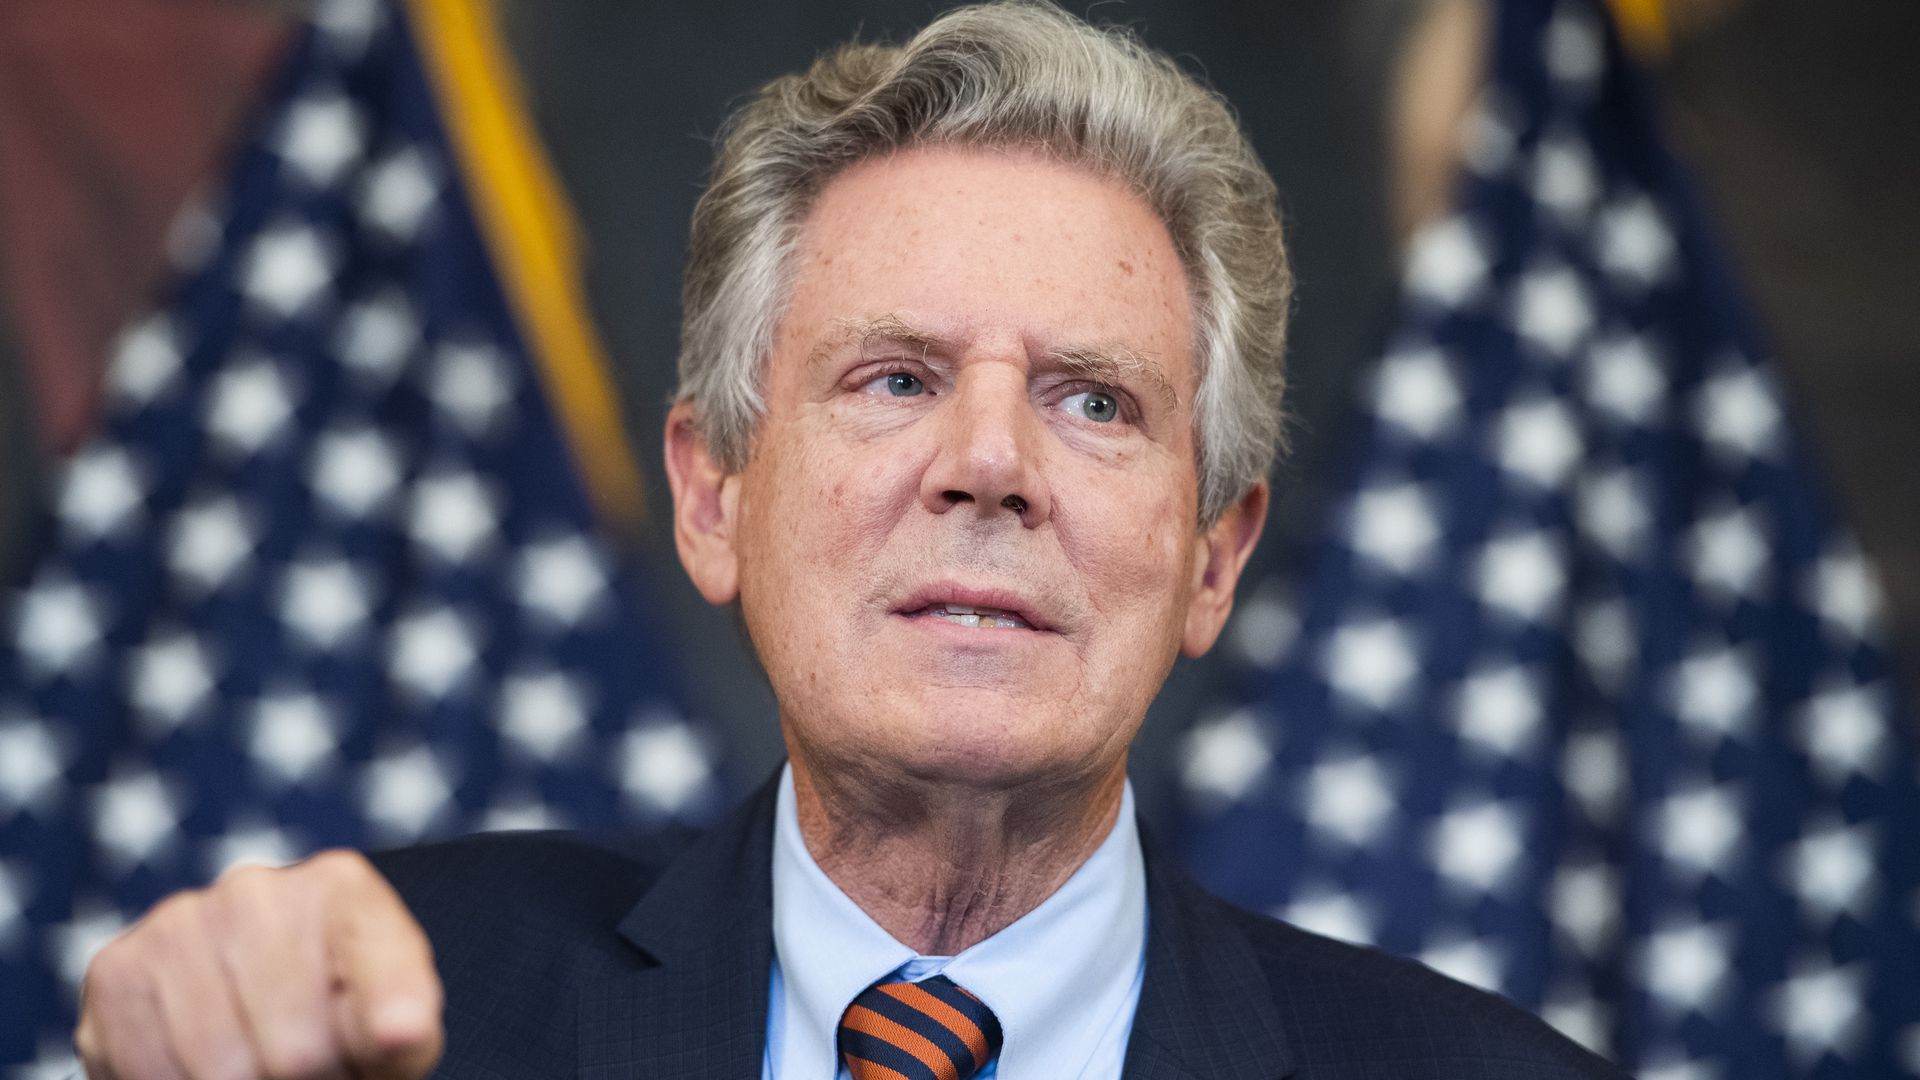 A photo of Rep. Frank Pallone (D-NJ) in front of an American flag.